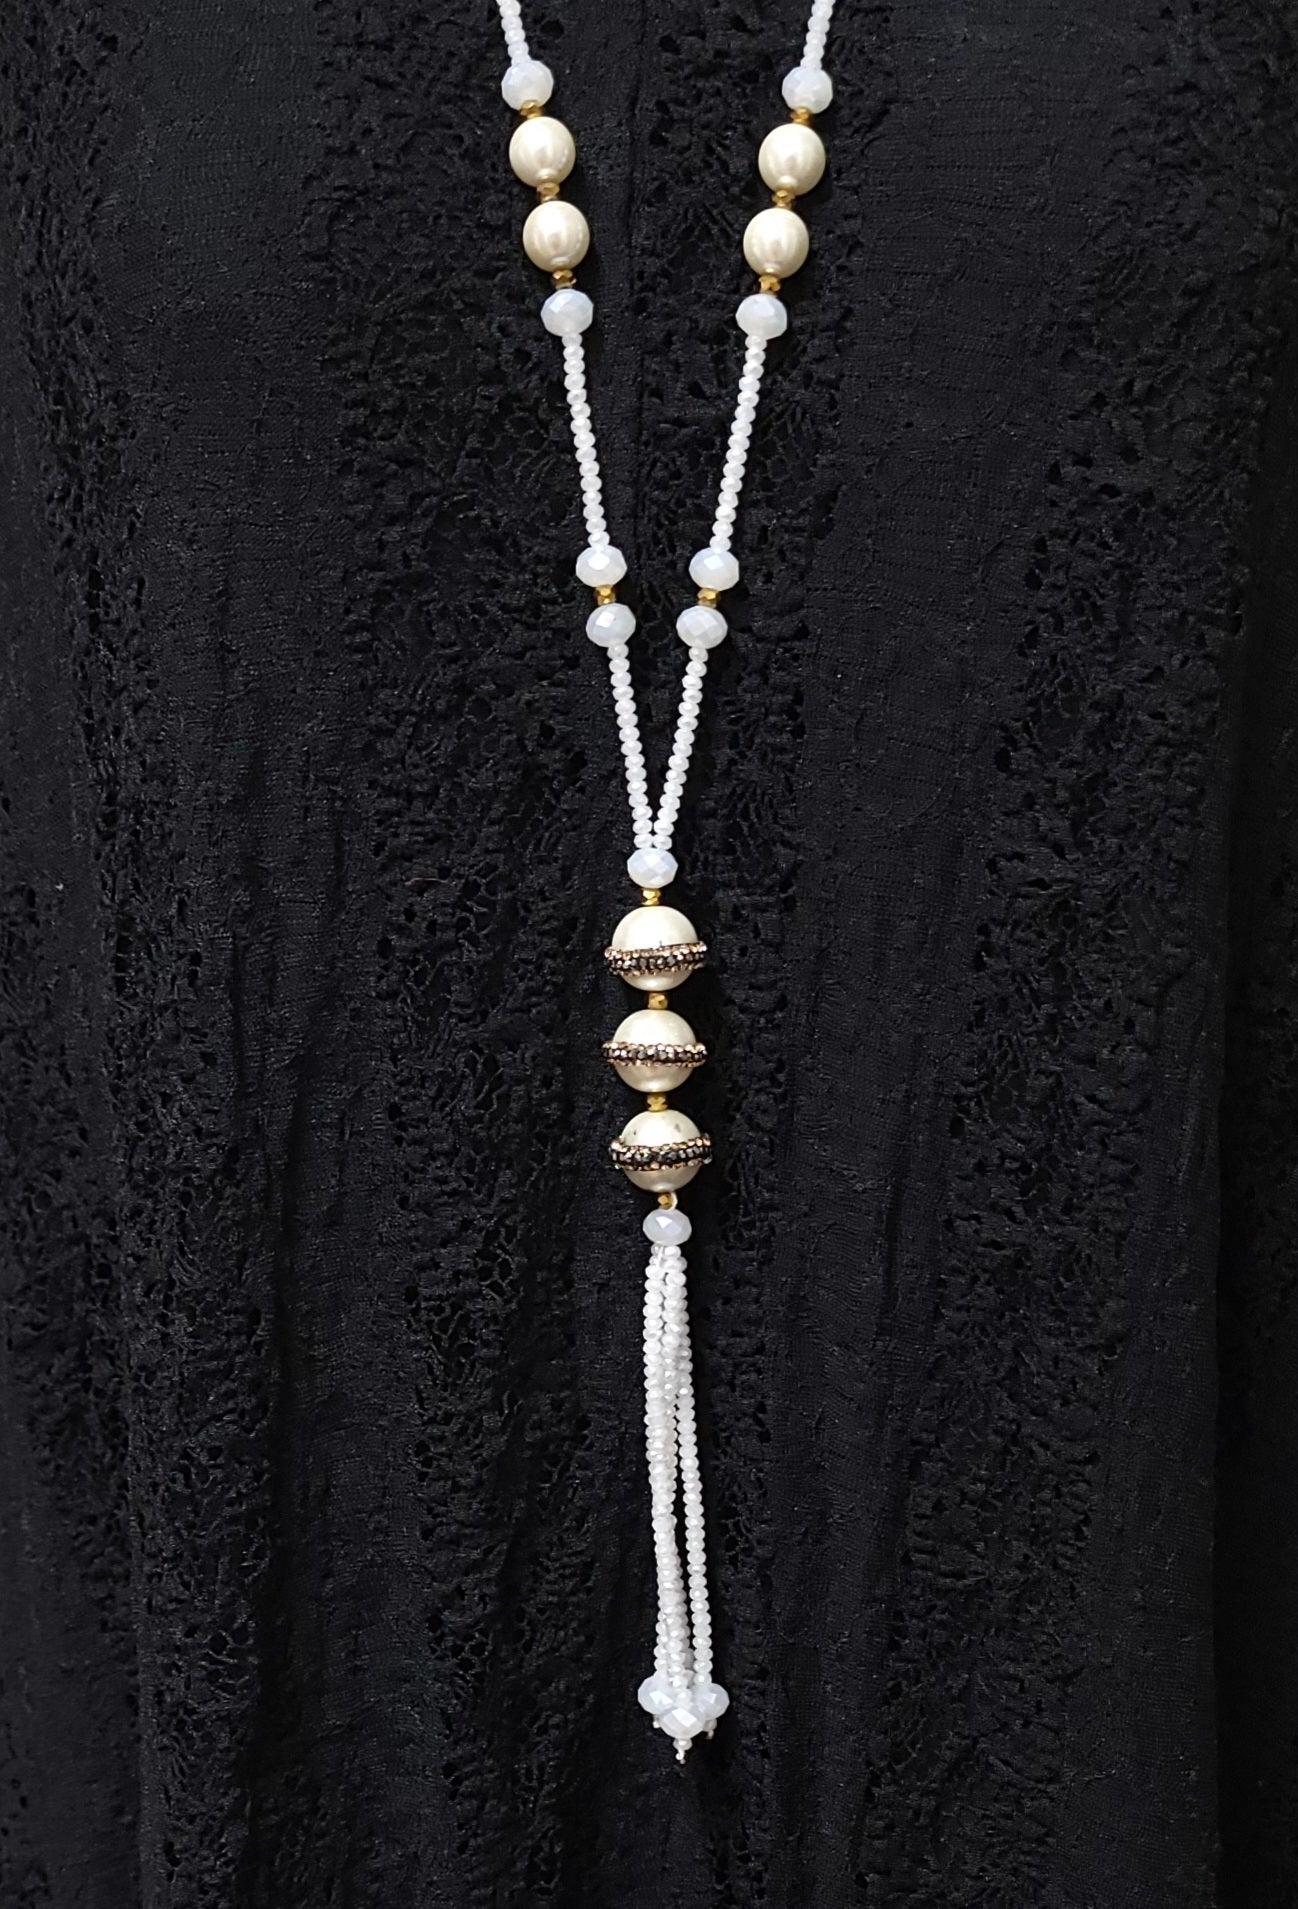 Classy 3 Tier Pearl Necklace with Rhinestones